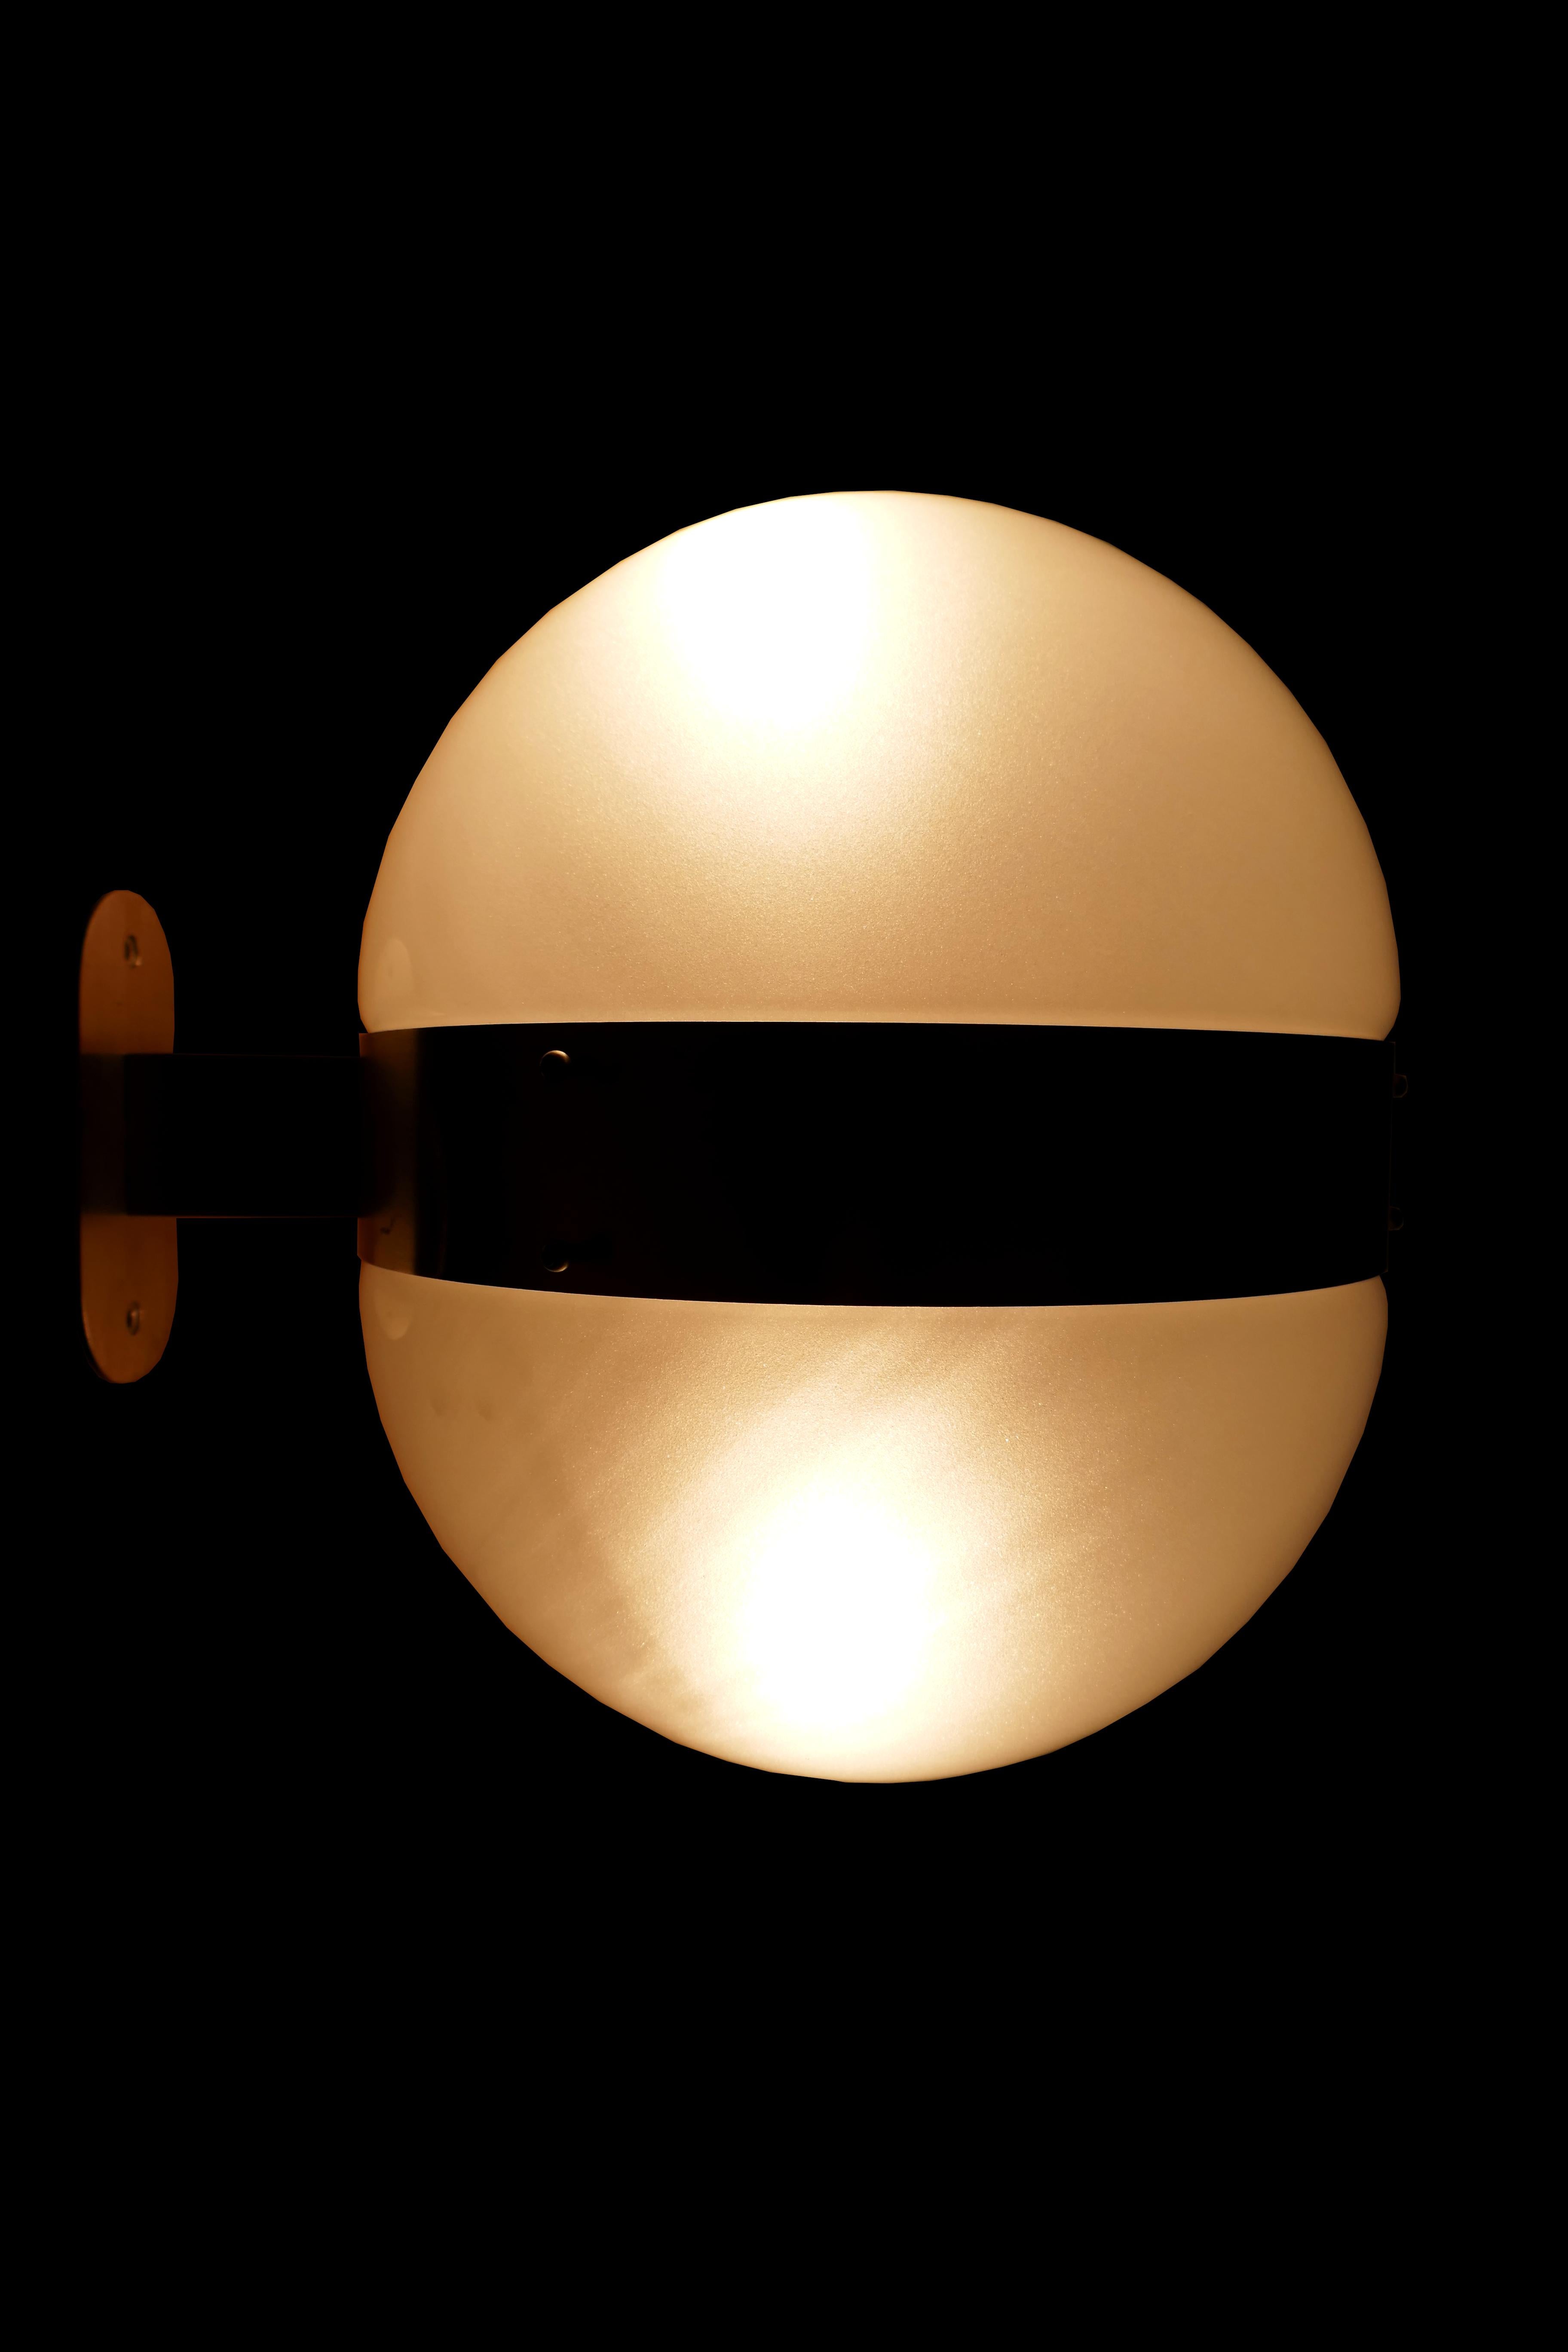 Single wall light
Design by Sergio Mazza for Artemide
Good conditions
Thank you